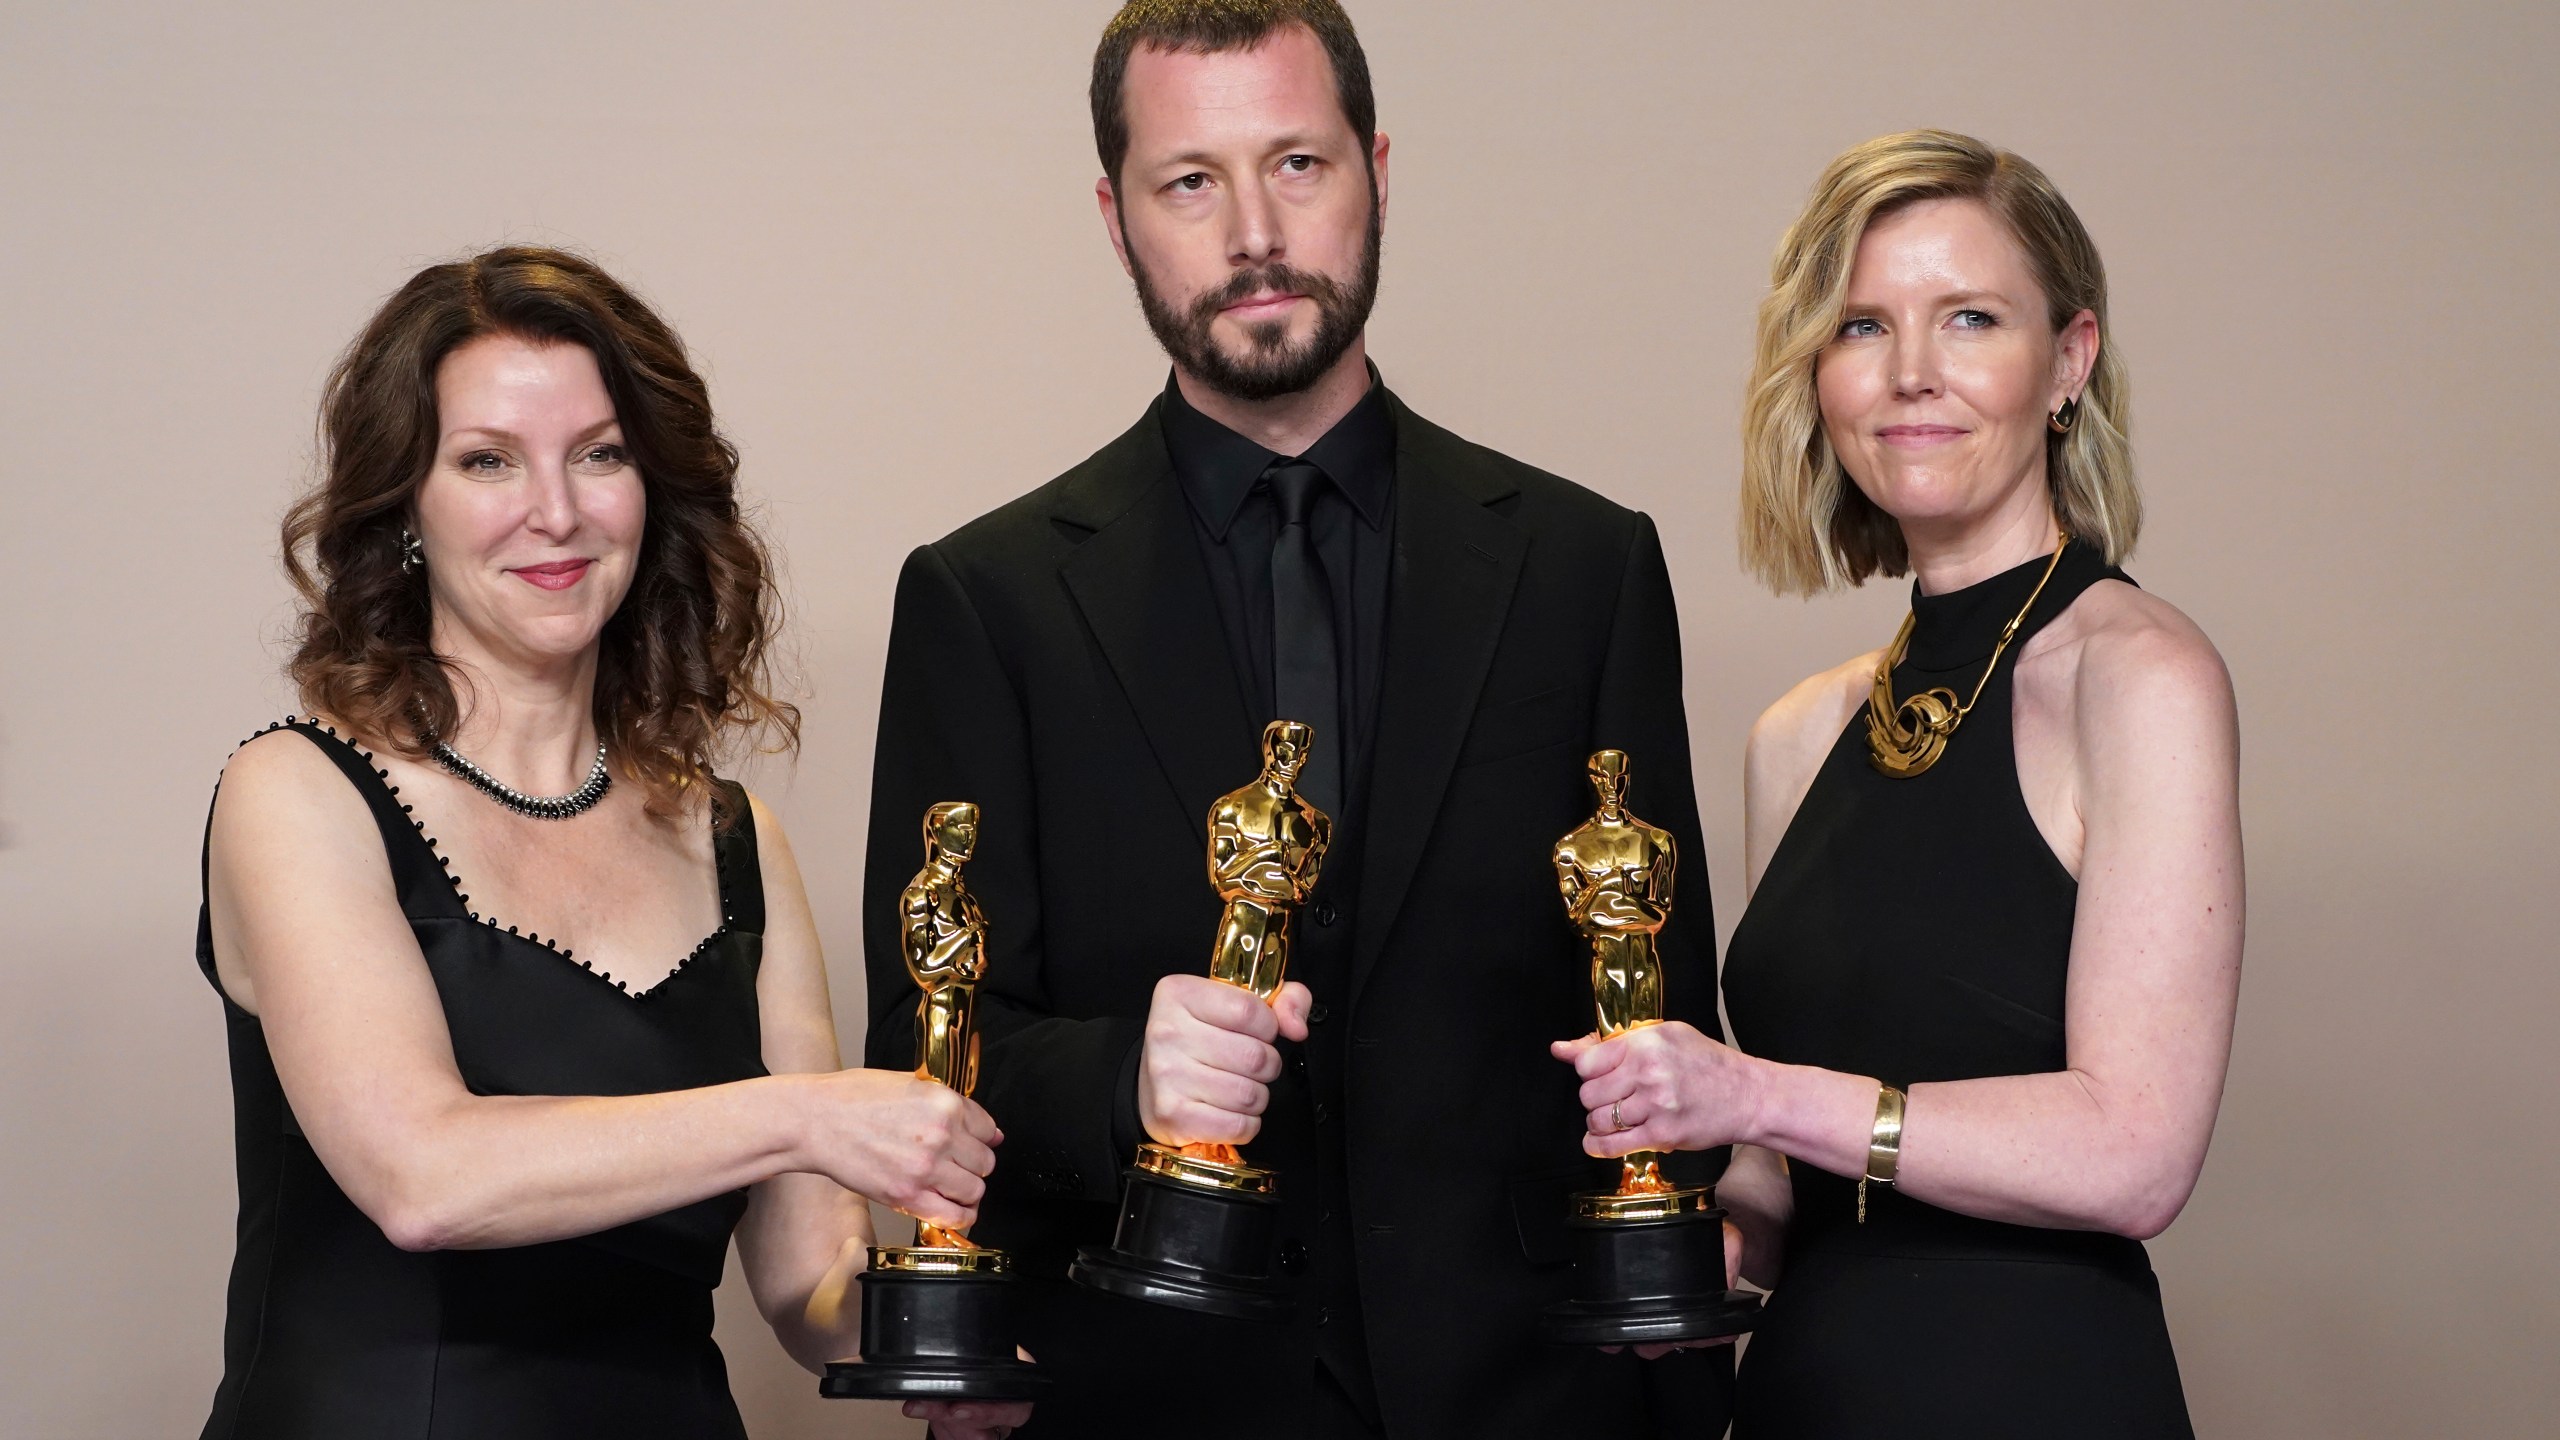 Raney Aronson-Rath, from left, Mstyslav Chernov, and Michelle Mizner pose in the press room with the award for best documentary feature film for "20 Days in Mariupol" at the Oscars on Sunday, March 10, 2024, at the Dolby Theatre in Los Angeles. (Photo by Jordan Strauss/Invision/AP)